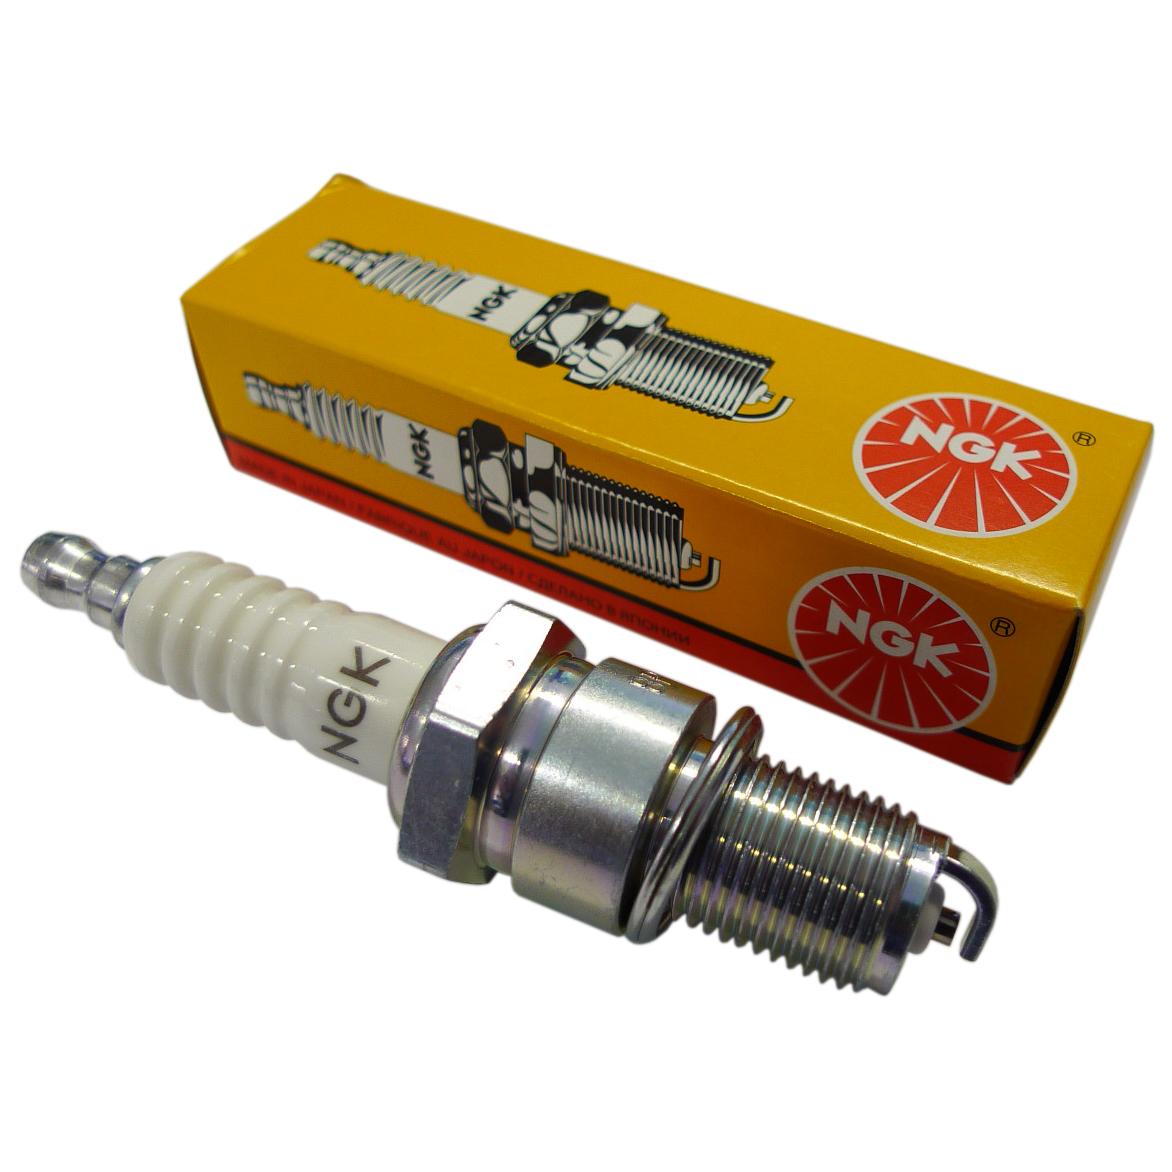 6130 Trade Price 87295161302 Gutbrod 4 Pack GENUINE NGK Replacement SPARK PLUGS BCPR5ES Stock No 